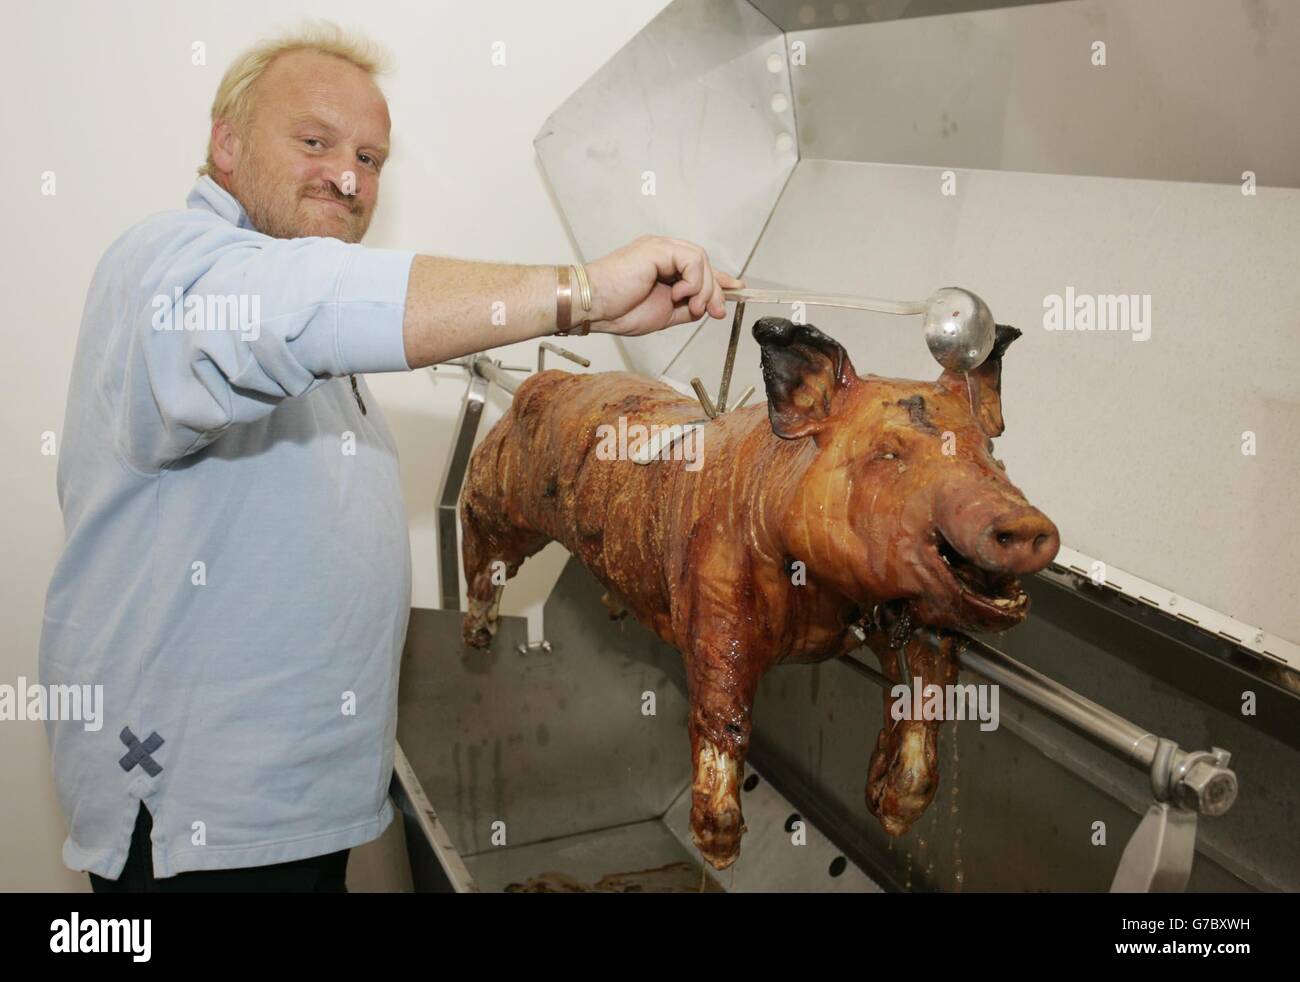 Celebrity chef Anthony Worrall Thompson roasts a pig on a spit at Somerset House in central London, during the 'Taste Of London' four-day extravaganza, which opened its doors to celebrate the best London has to offer in food, drink and entertainment. The event will run until Sunday. Stock Photo